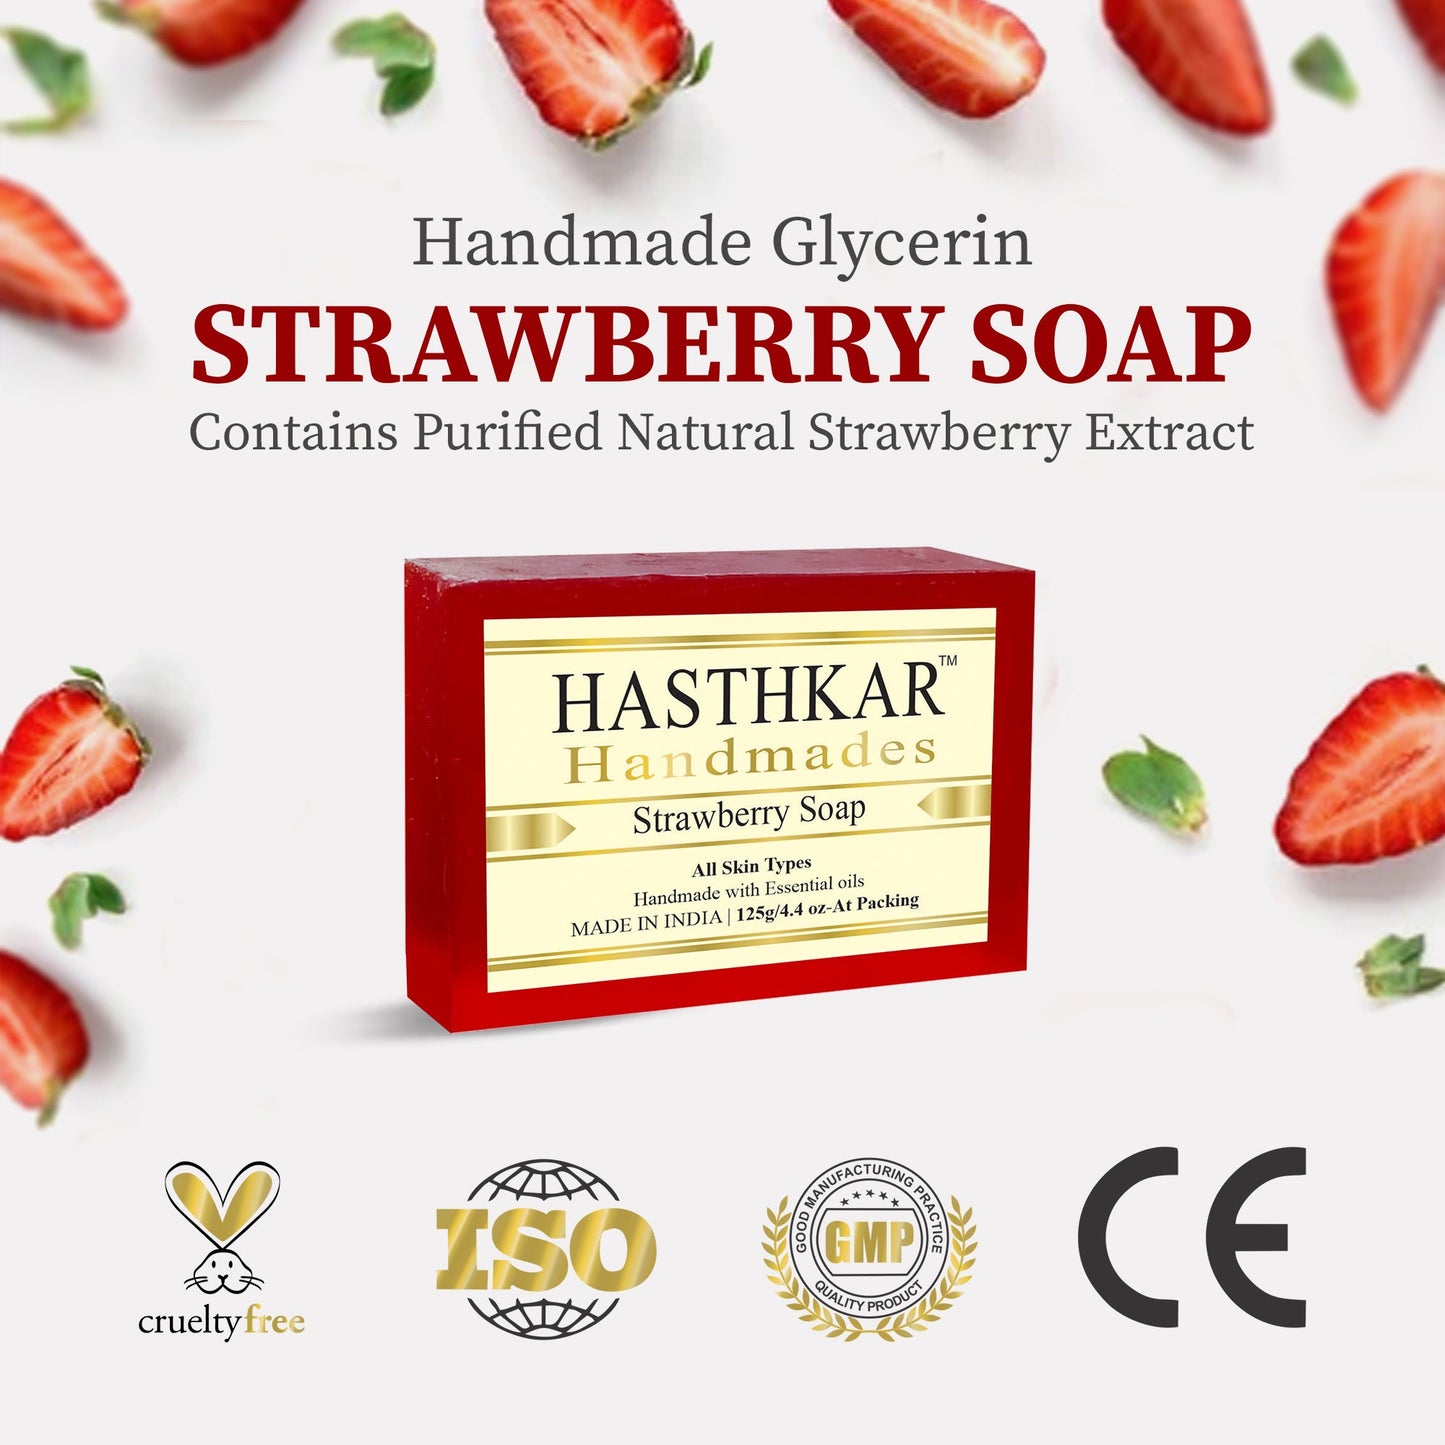 Hasthkar Handmades Glycerine Strawberry Soap For Helps In Nourishing And Revitalizing Your Skin | Remove The Excess Sebum From The Skin | Lightening Blemishes And Acne Scars On The Texture - 125Gm